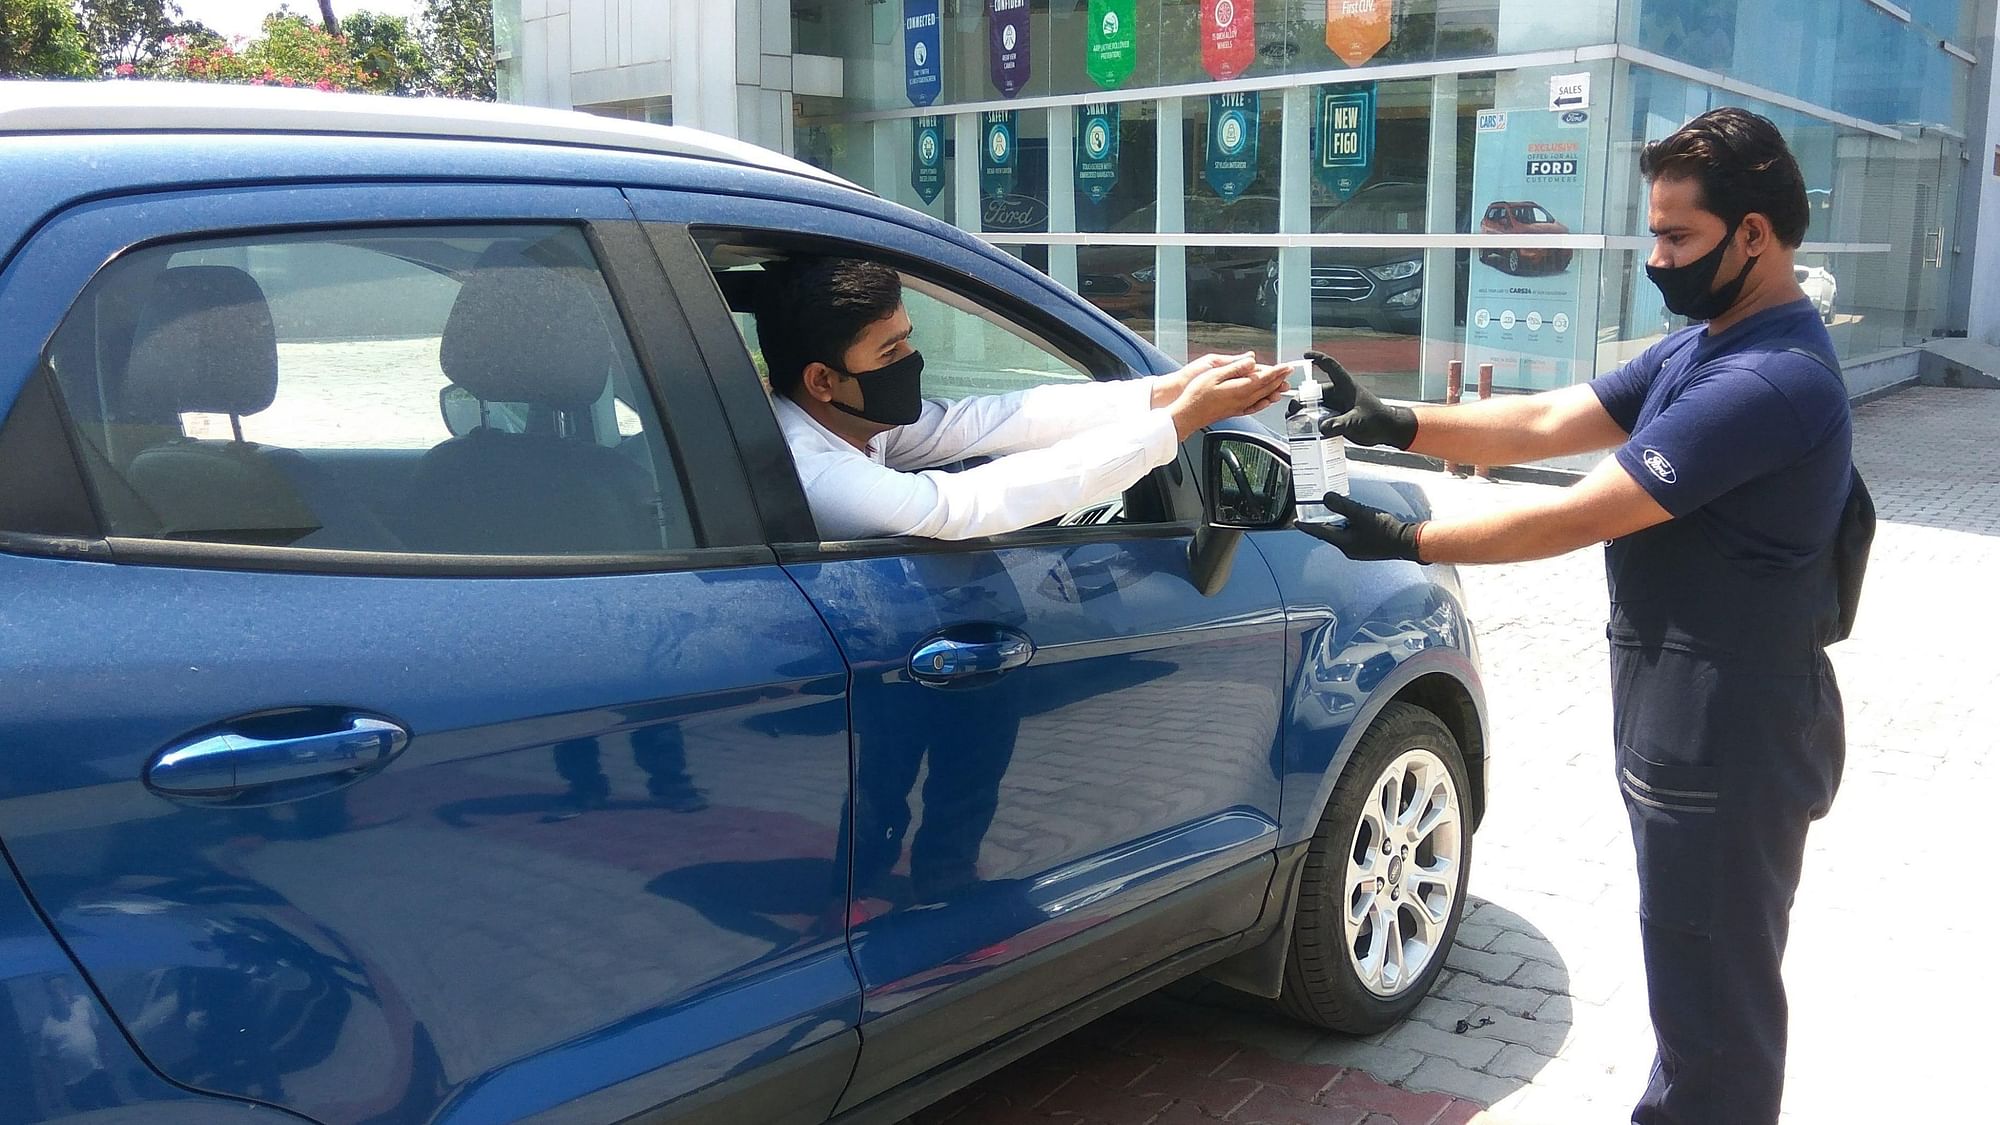 A customer taking a test drive at a Ford showroom sanitises his hands at the entrance.